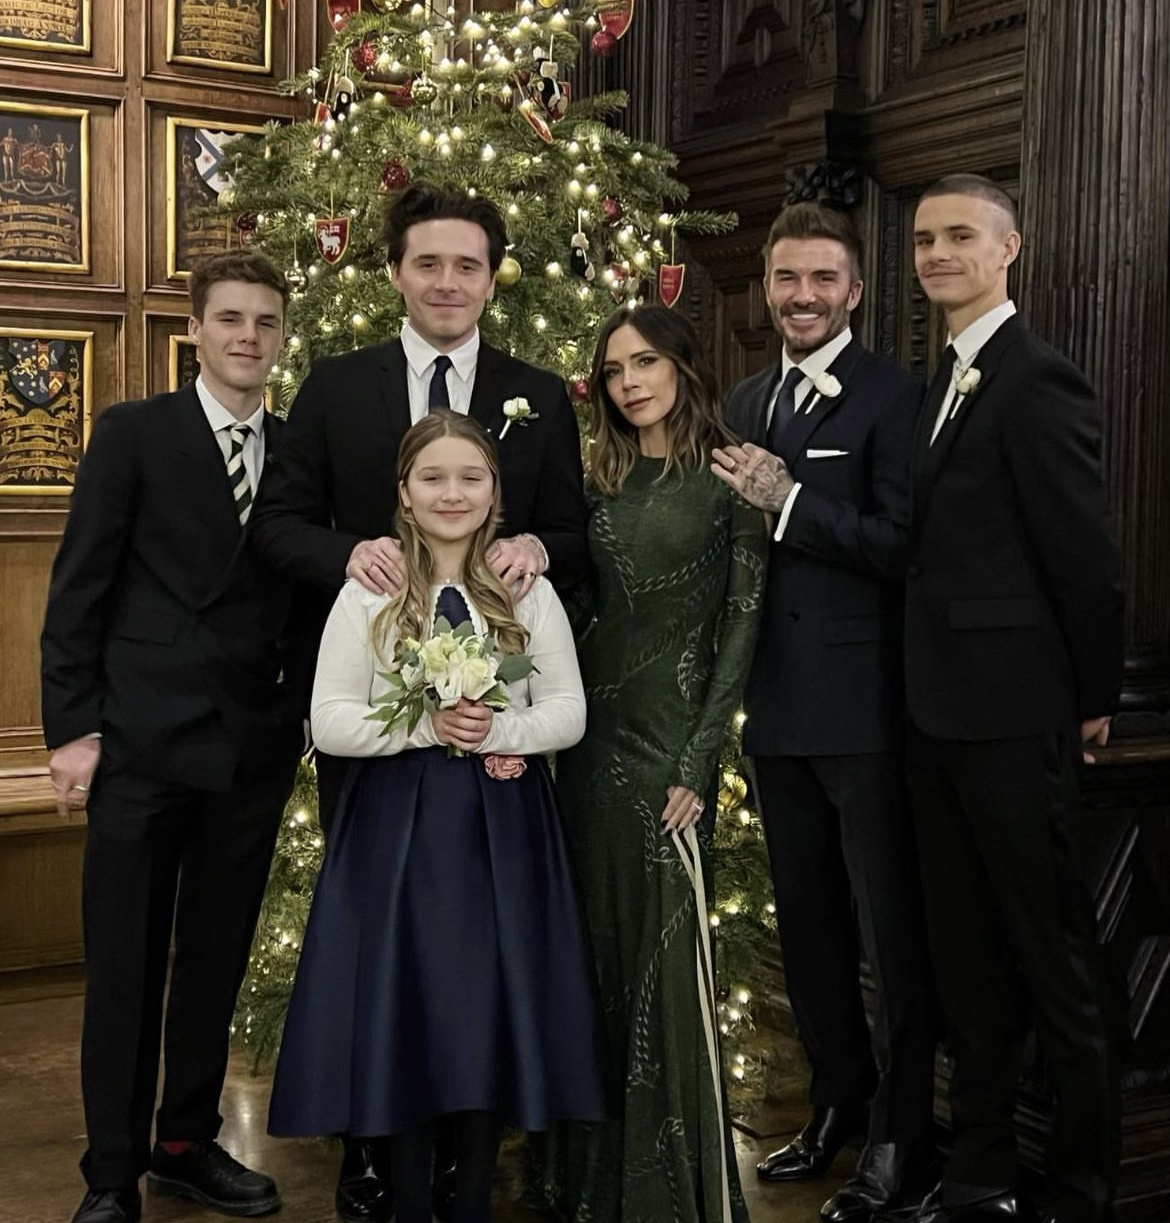 The Beckham Family in one photo.